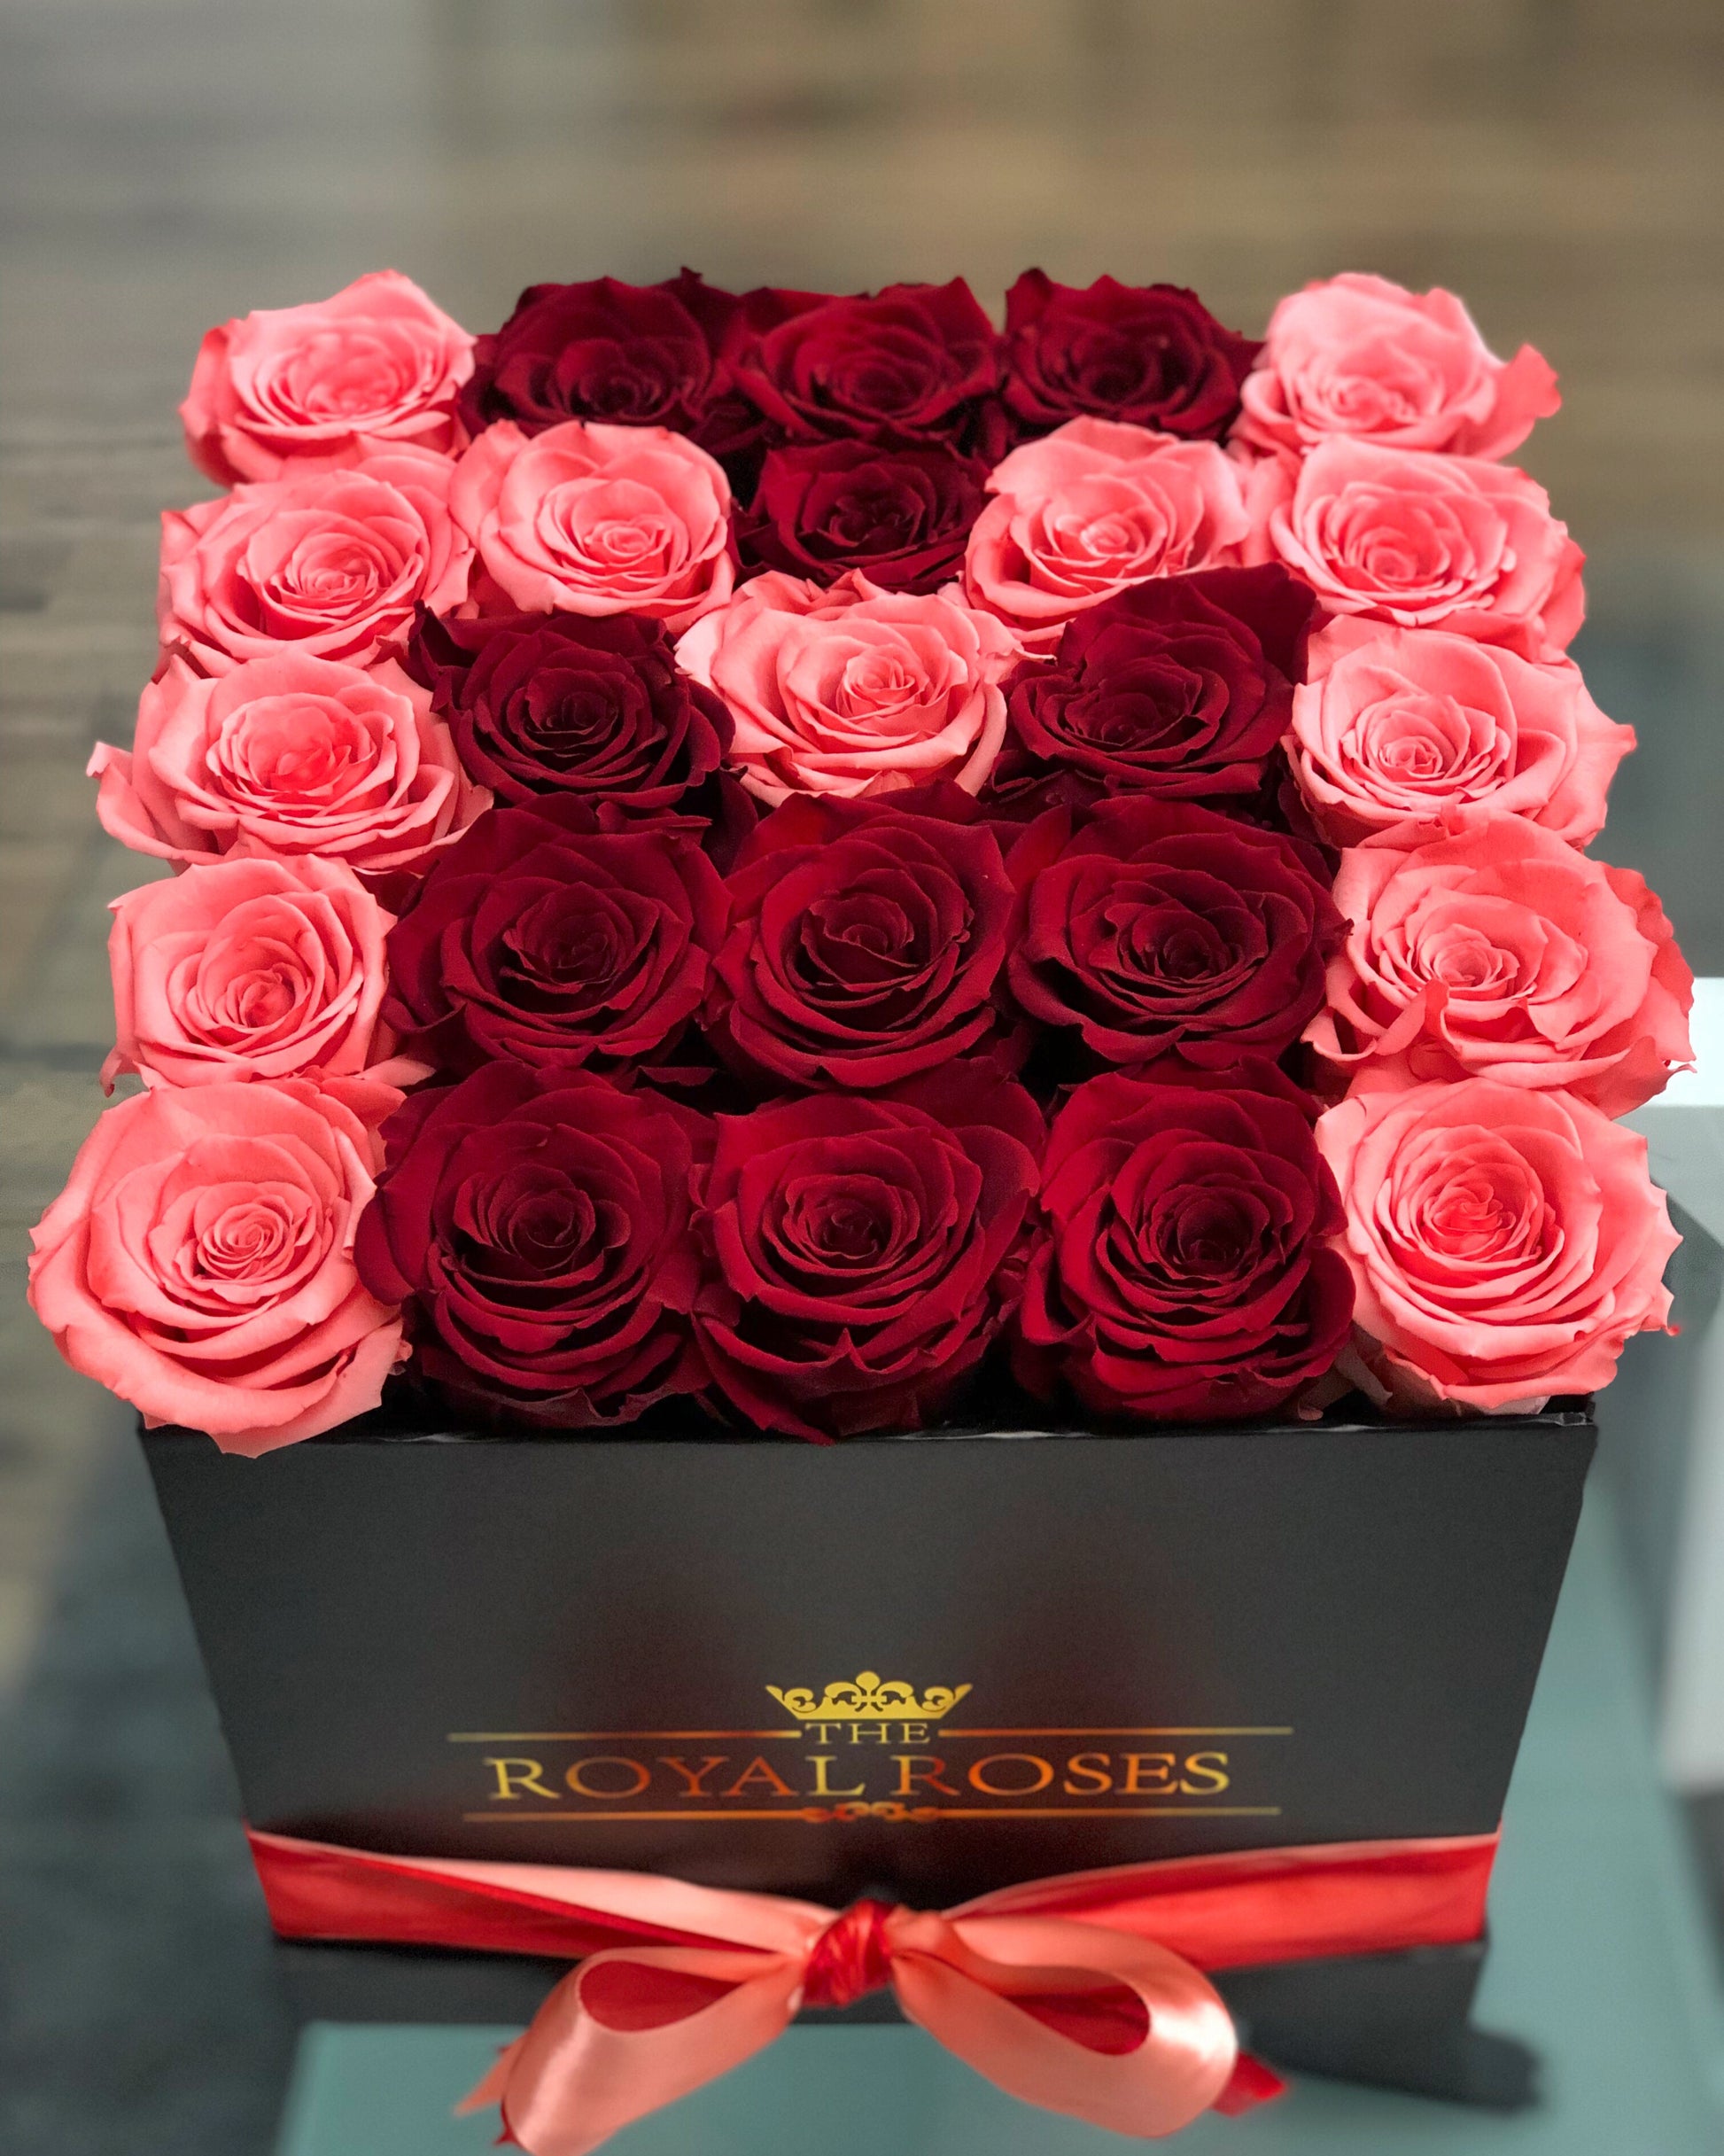 Real Long Lasting Roses - Square Box - Lifetime is Over 1 Year - The Royal Roses 